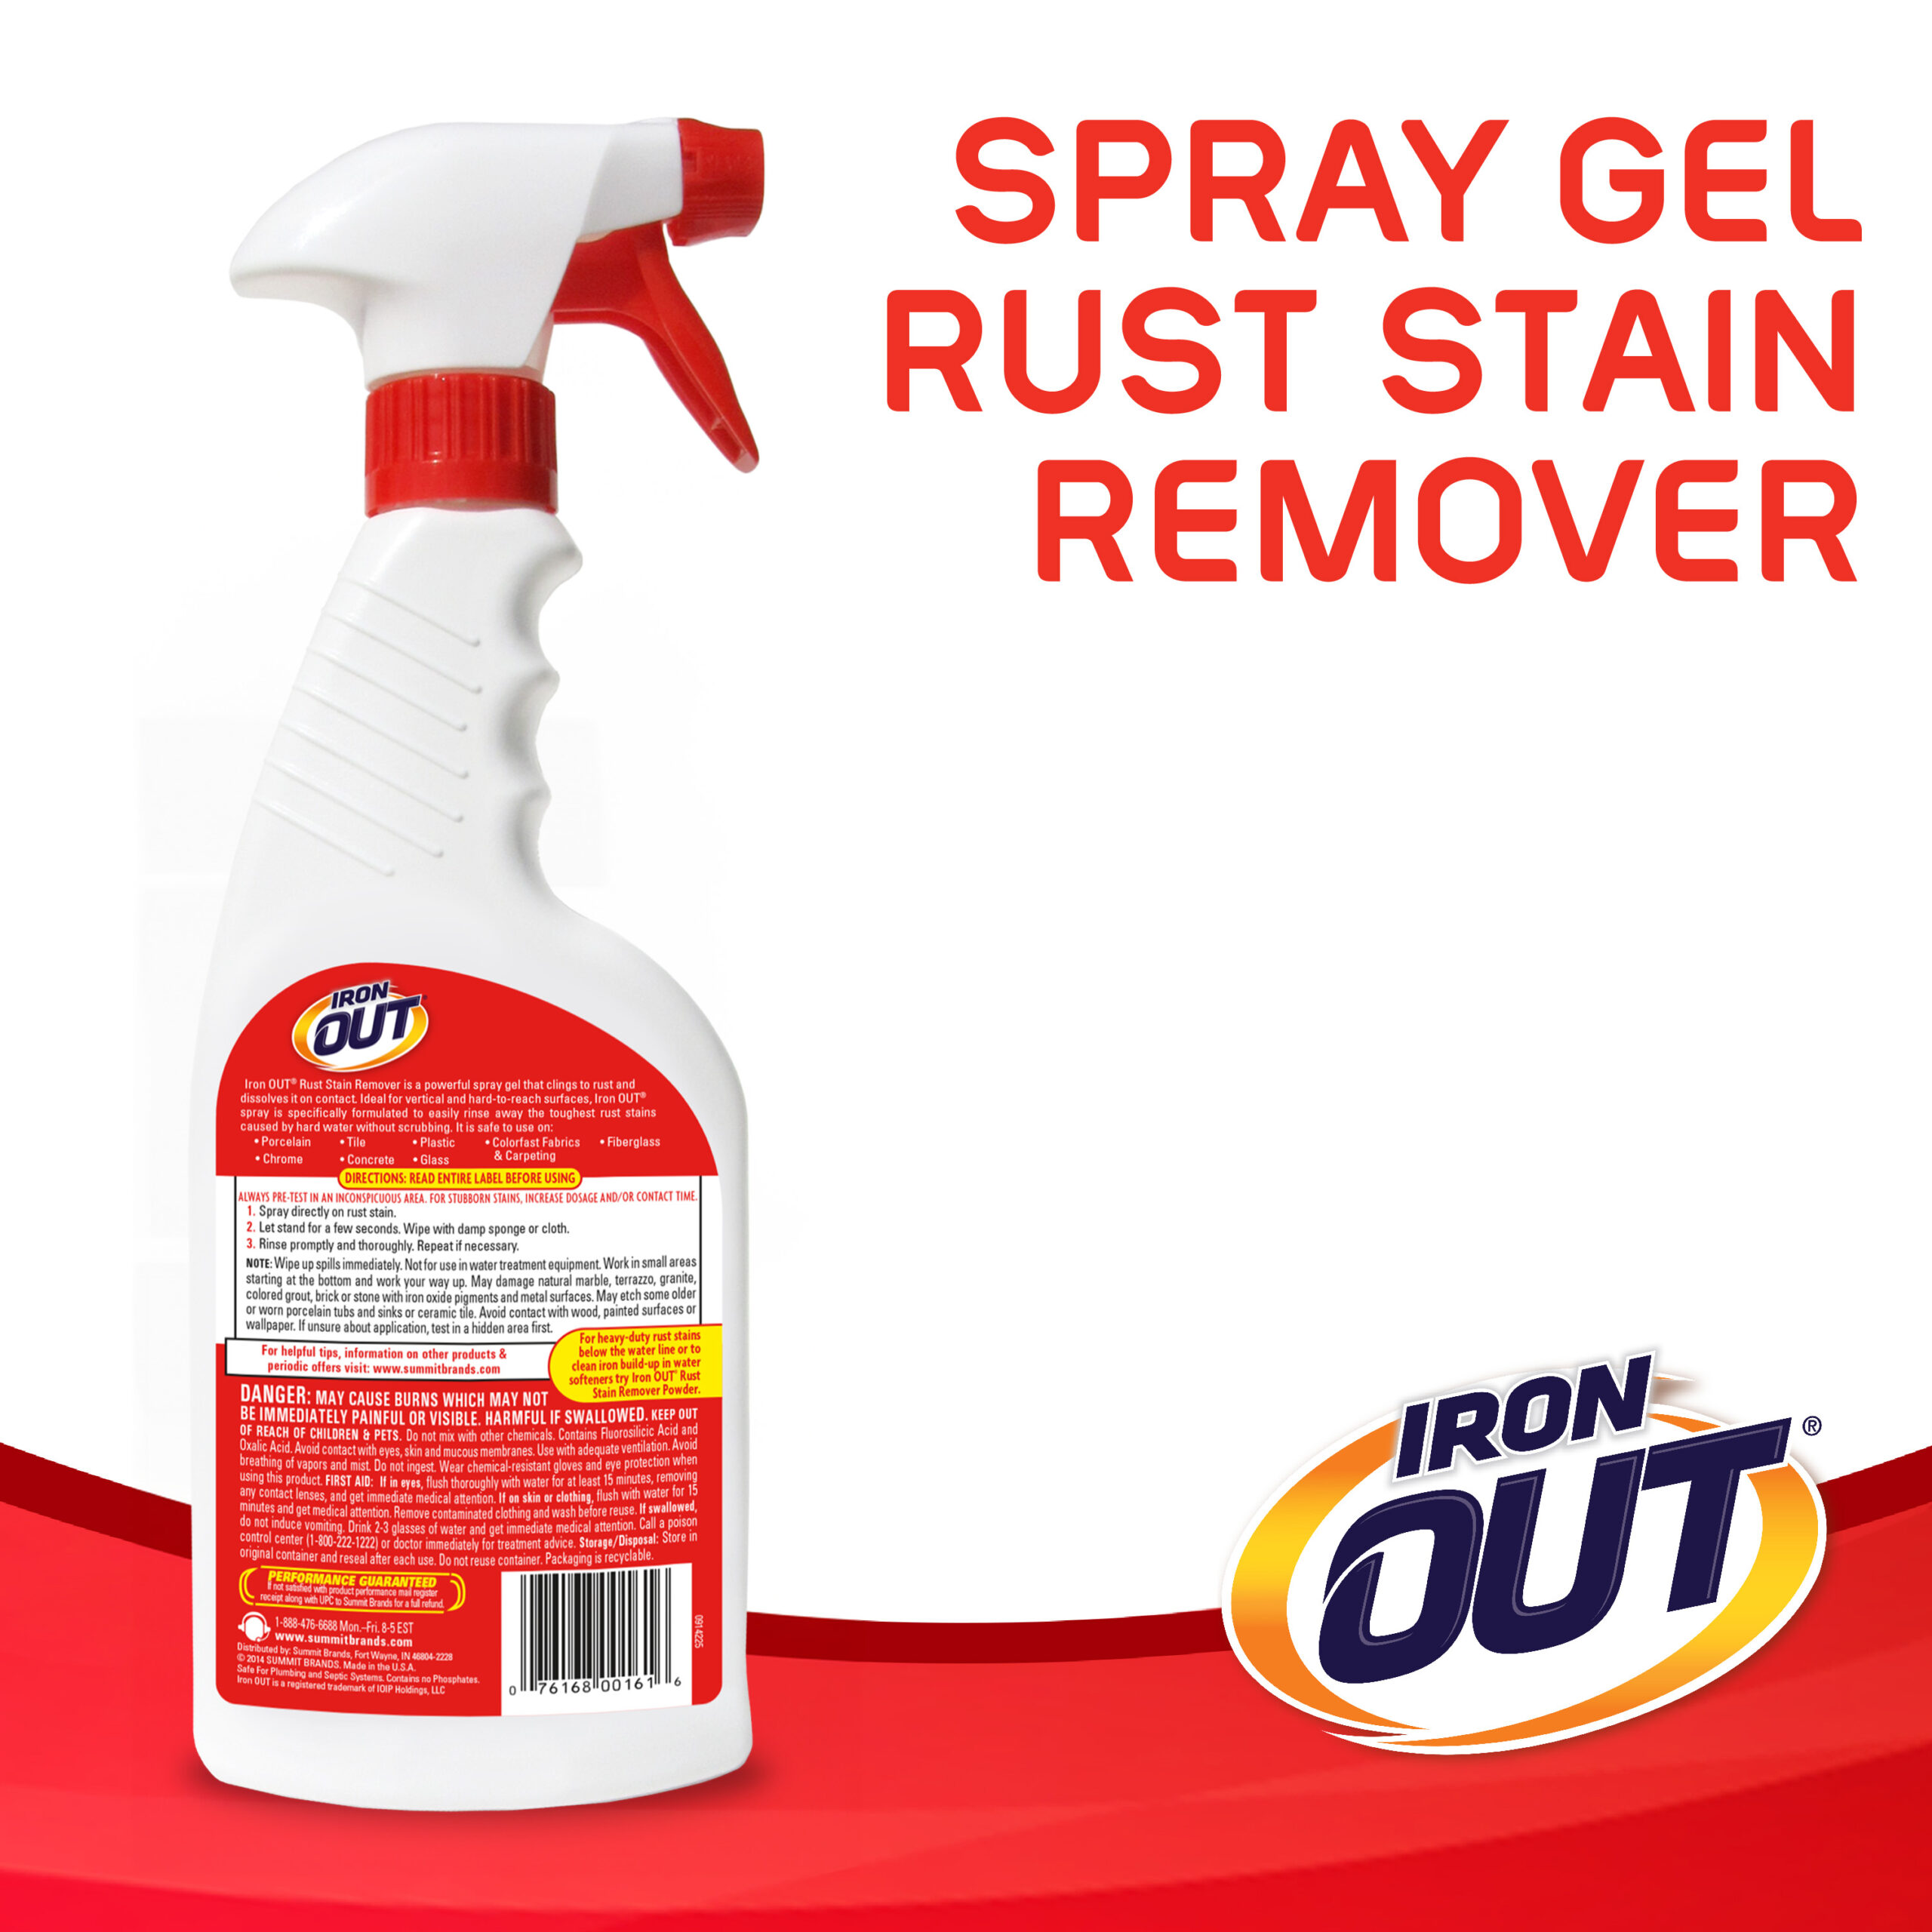  Quality Chemical's Rust-B-Gone Rust Stain Remover/Rust